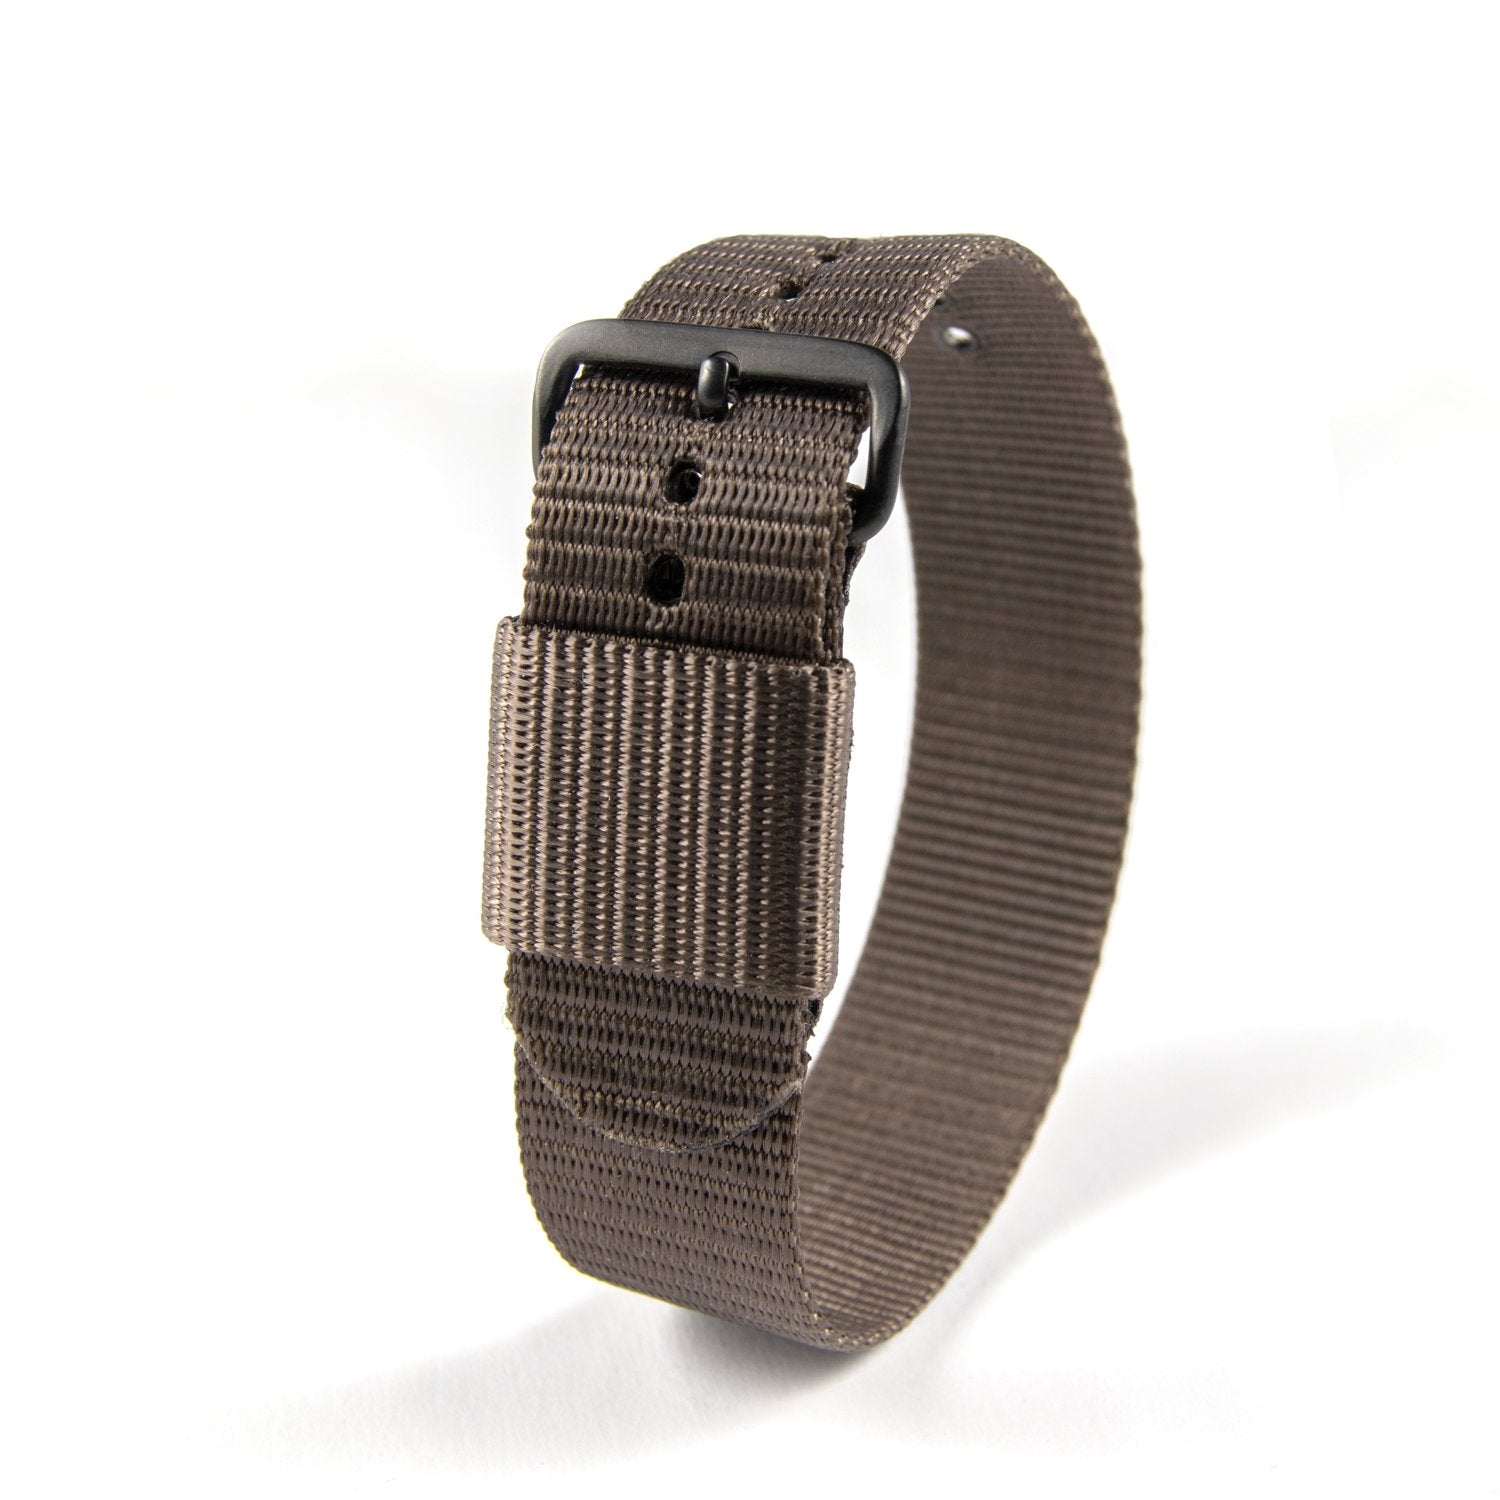 20mm - 11" Length - Ballistic Nylon Watch Band/Strap with Stainless Steel Buckle - marathonwatch